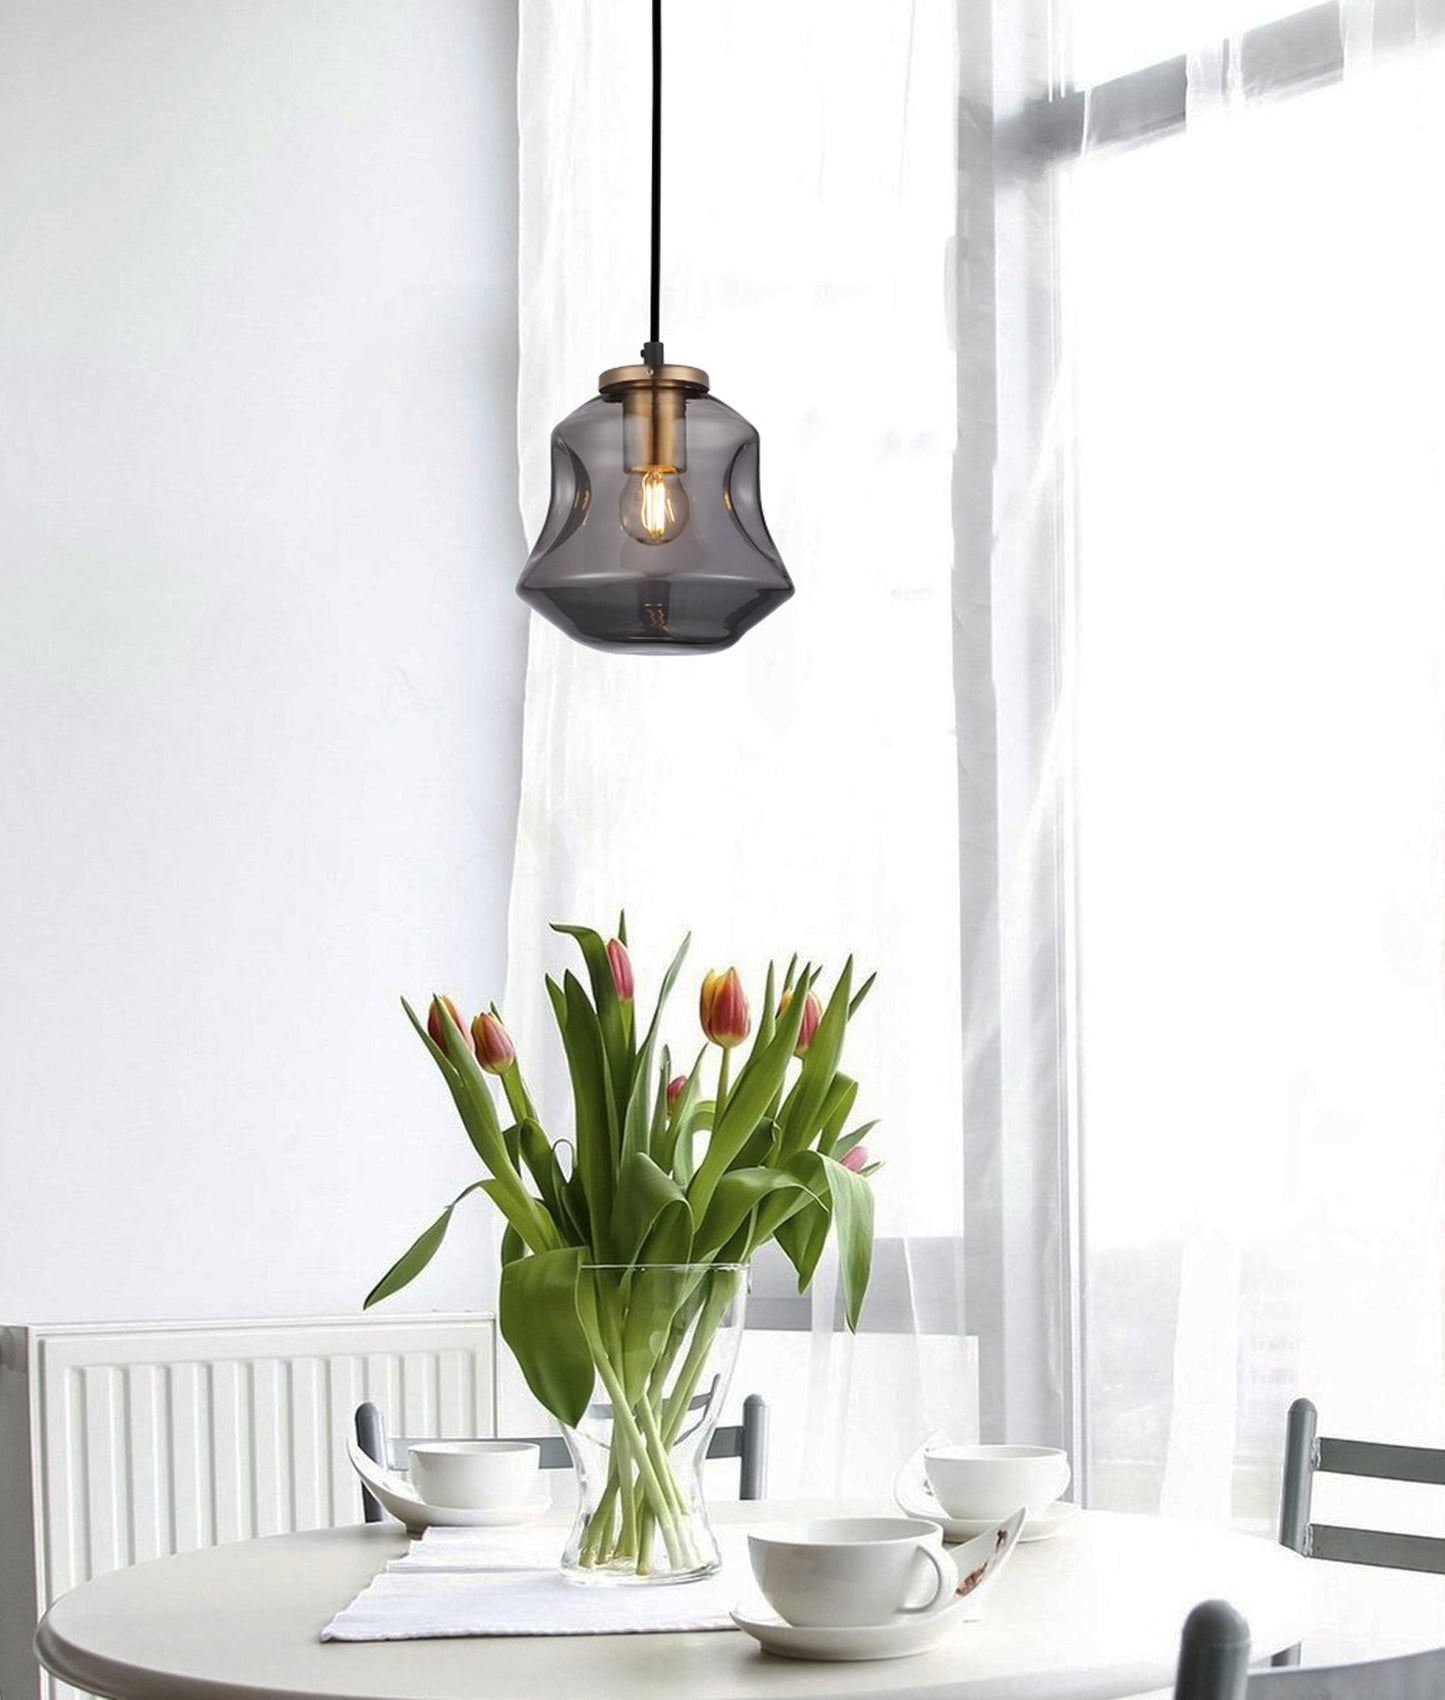 FOSSETTE: Interior Dimpled Smoked Mirror Effect Angled Bell Glass Pendant Light